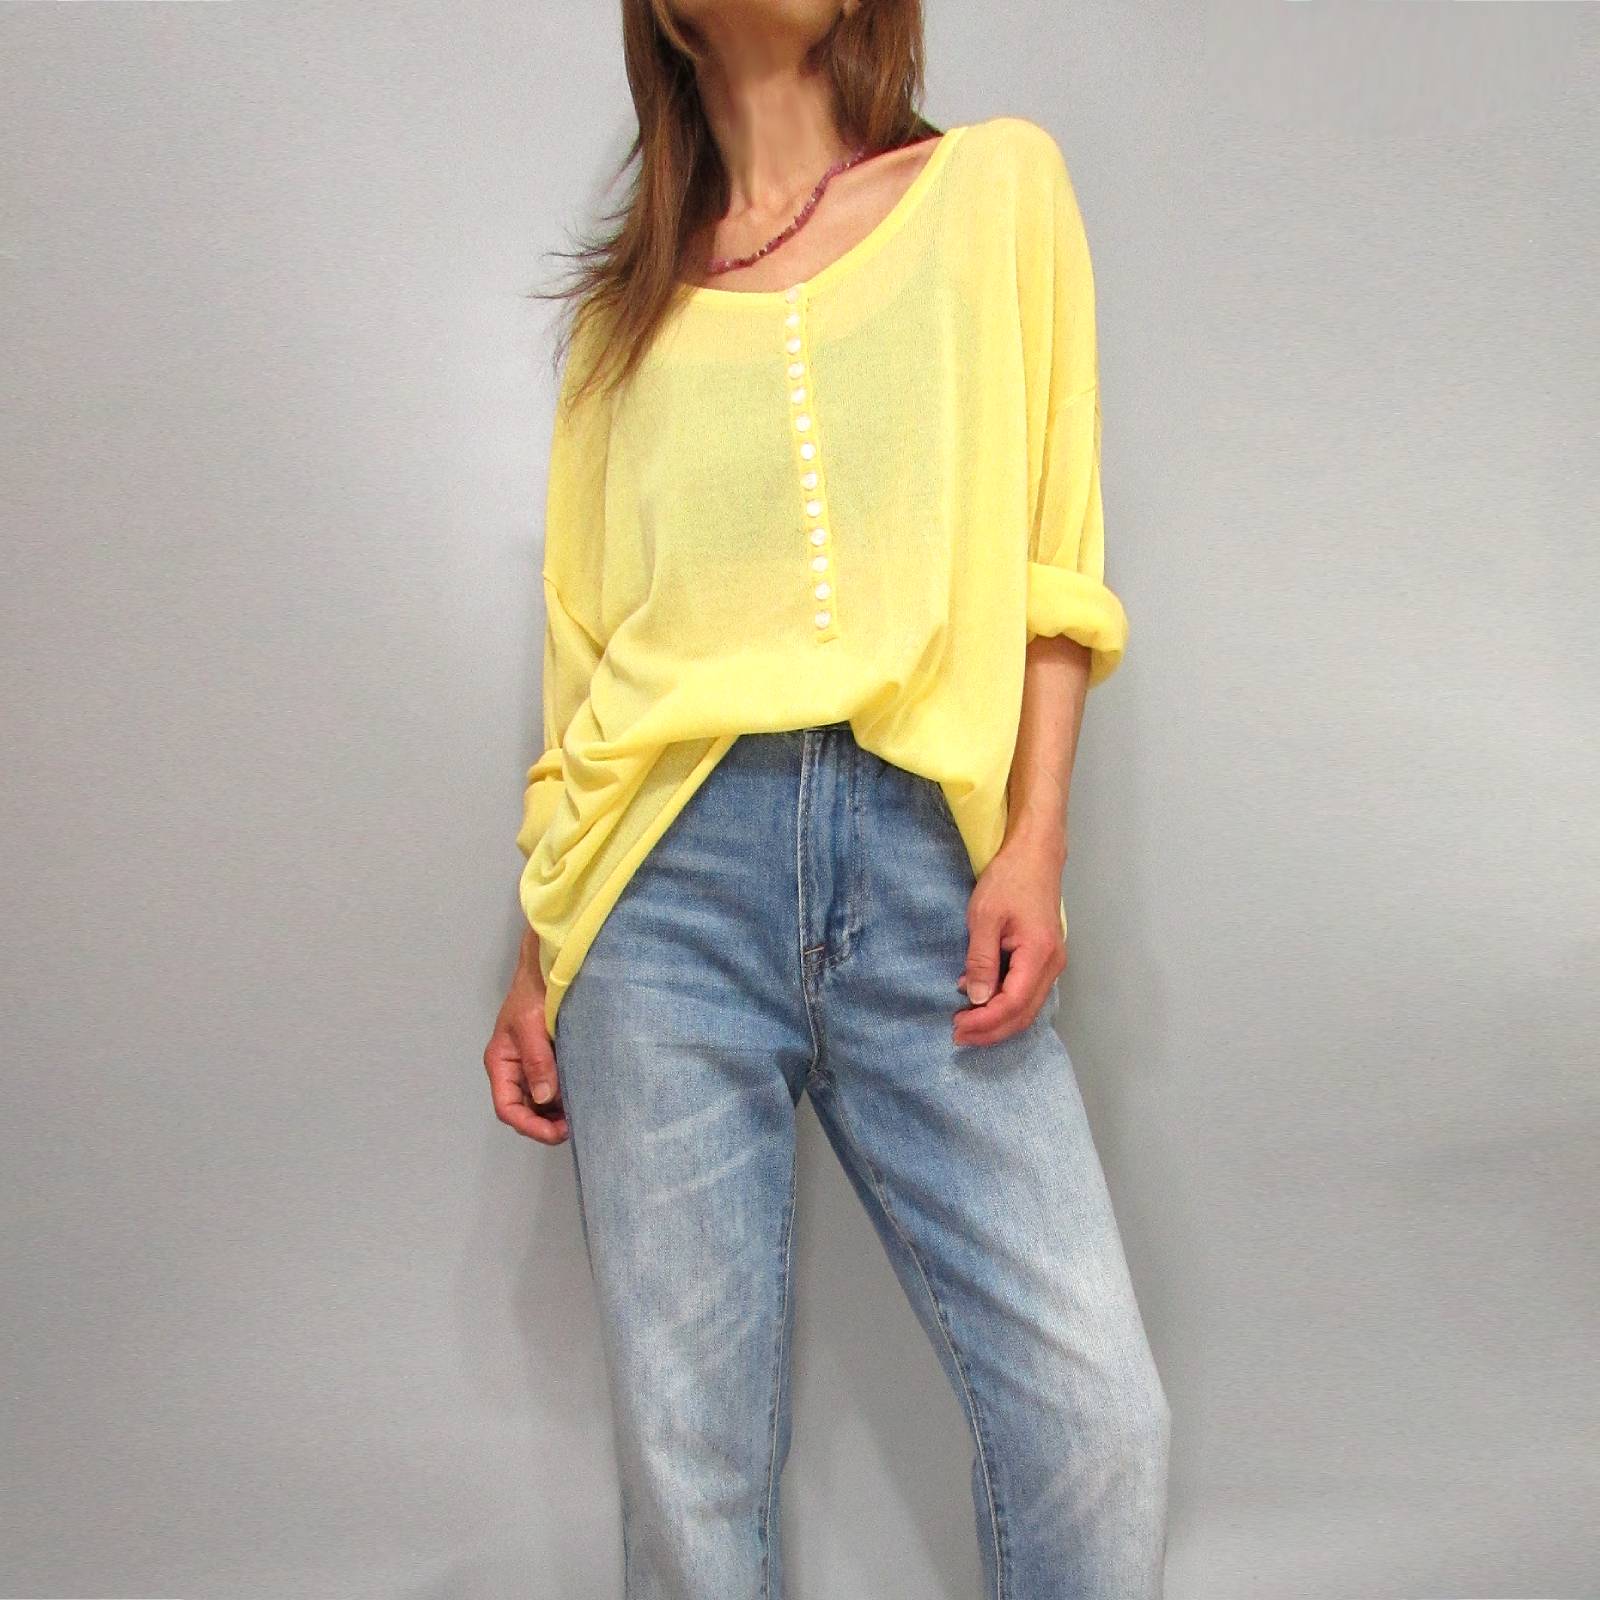 Tops844 Long Sleeve Knitted Henley Blouse/Pineapple